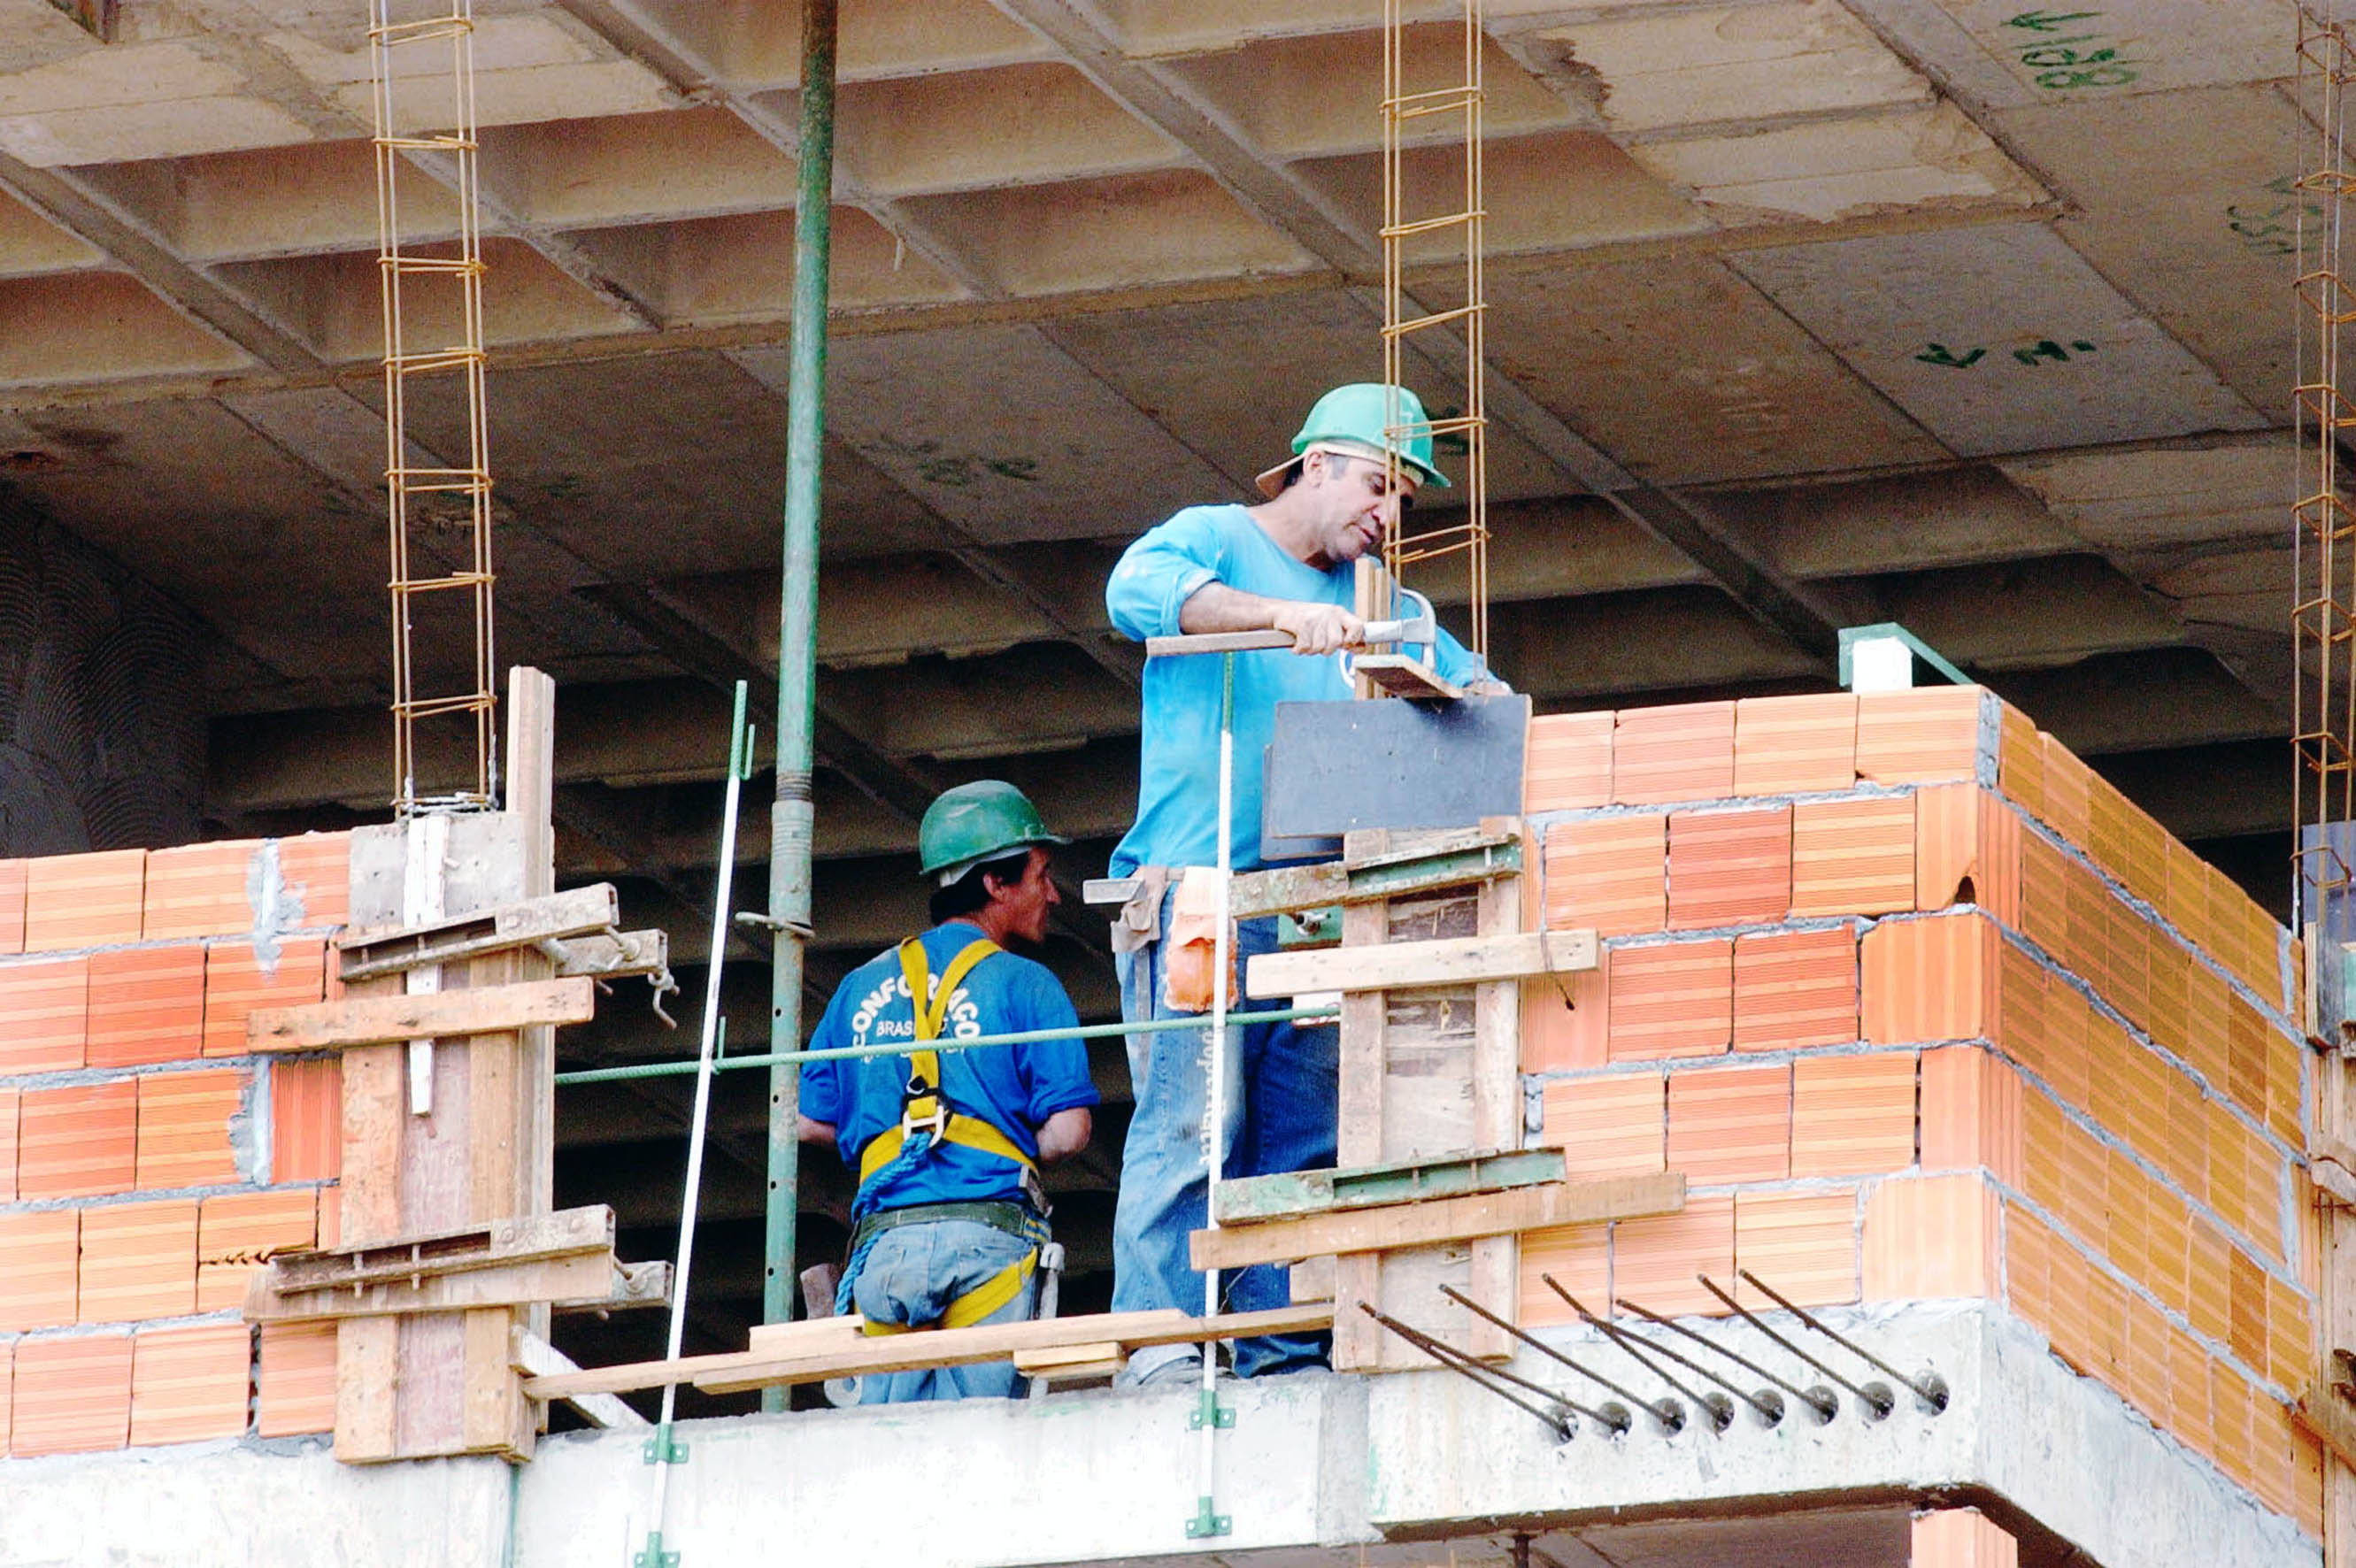 Brazilian Construction Costs on the Rise